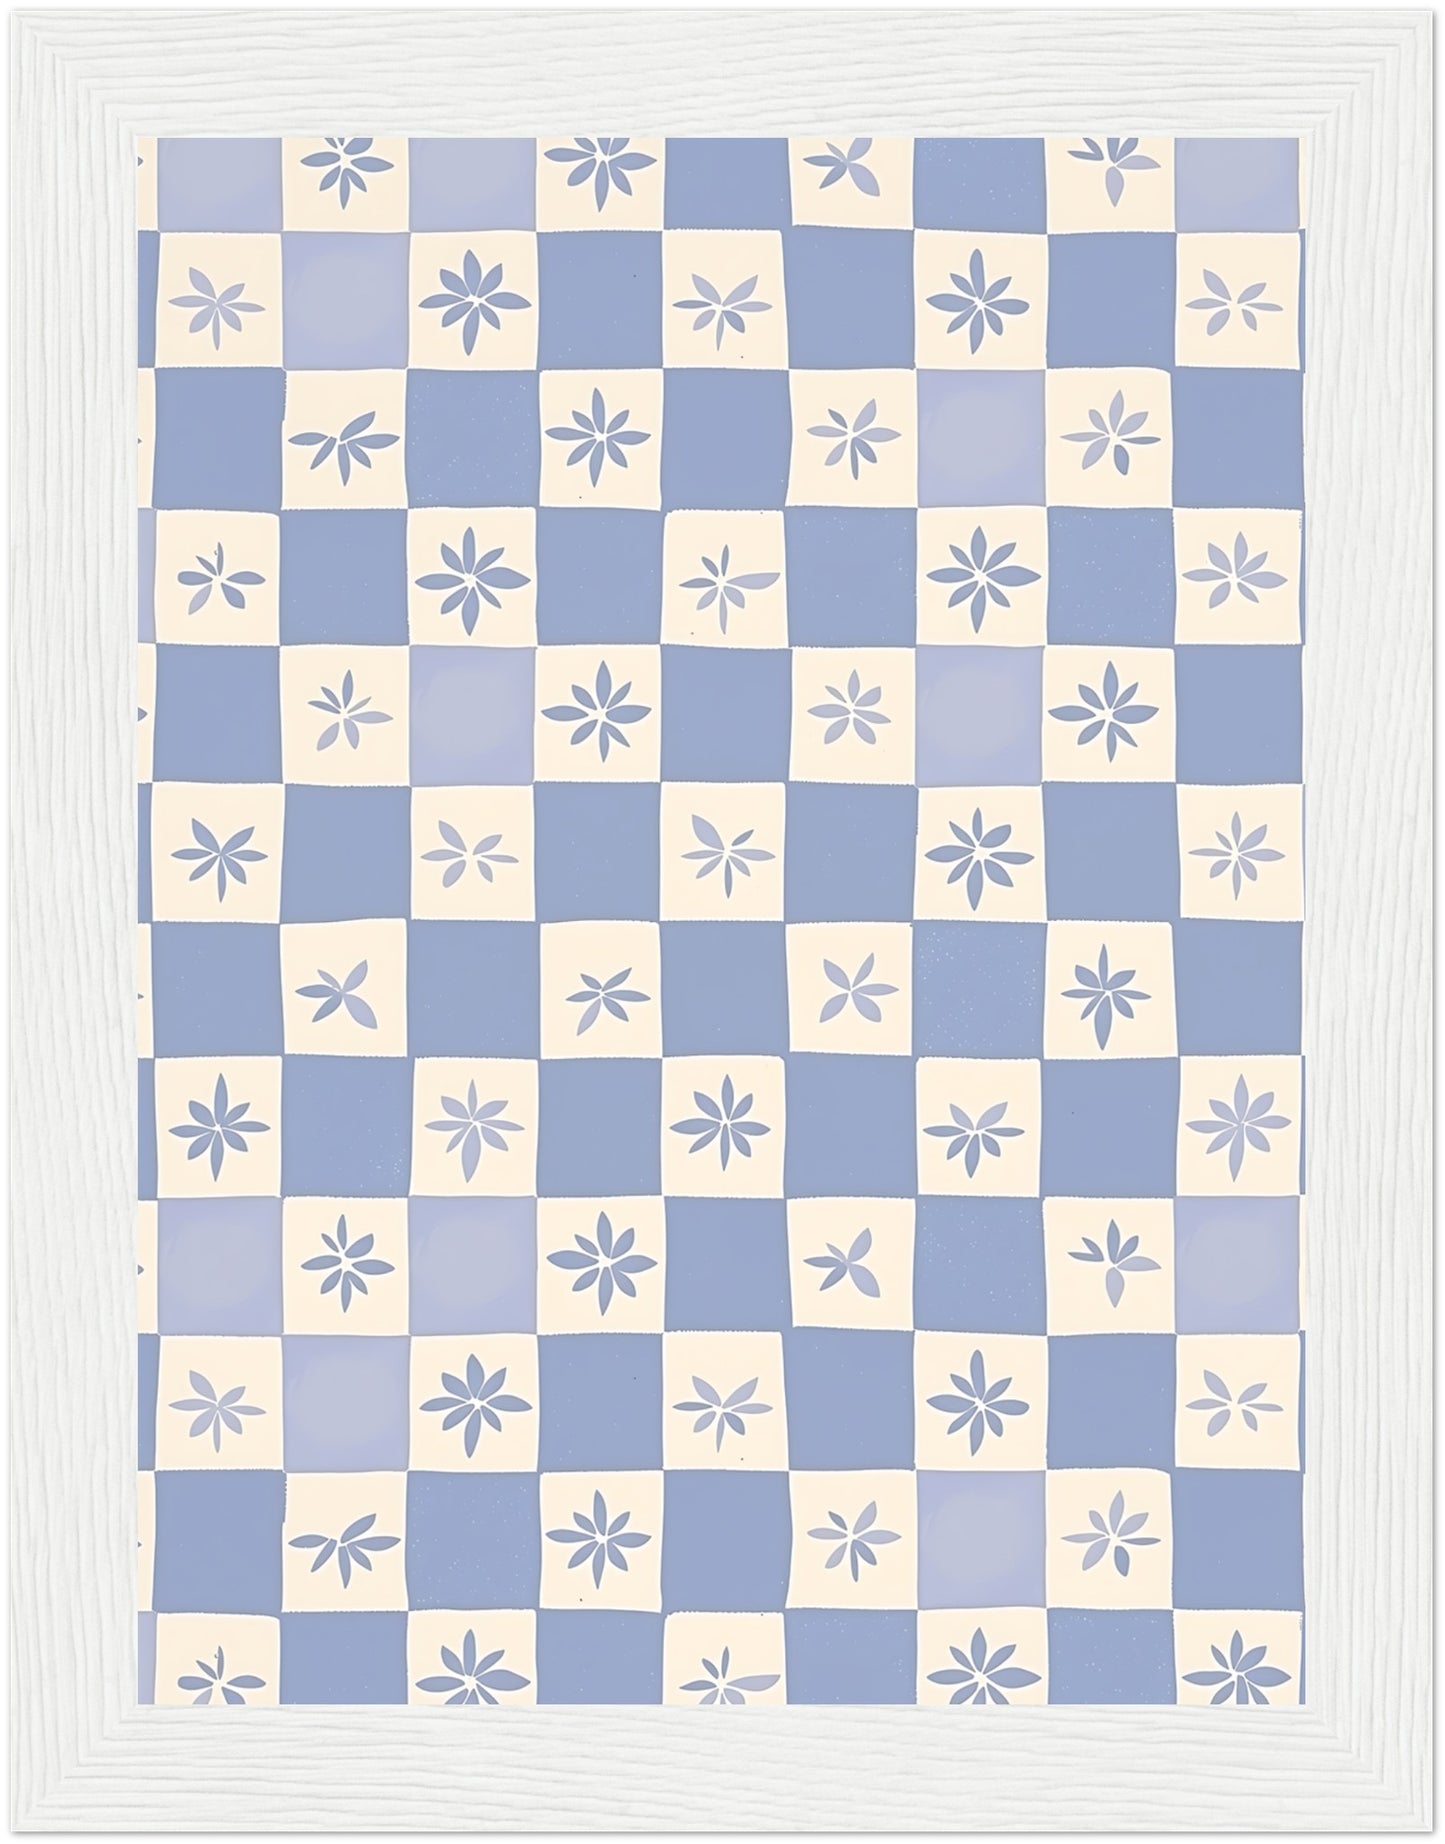 A framed checkerboard pattern with alternating blue squares and white squares, each featuring a flower design.